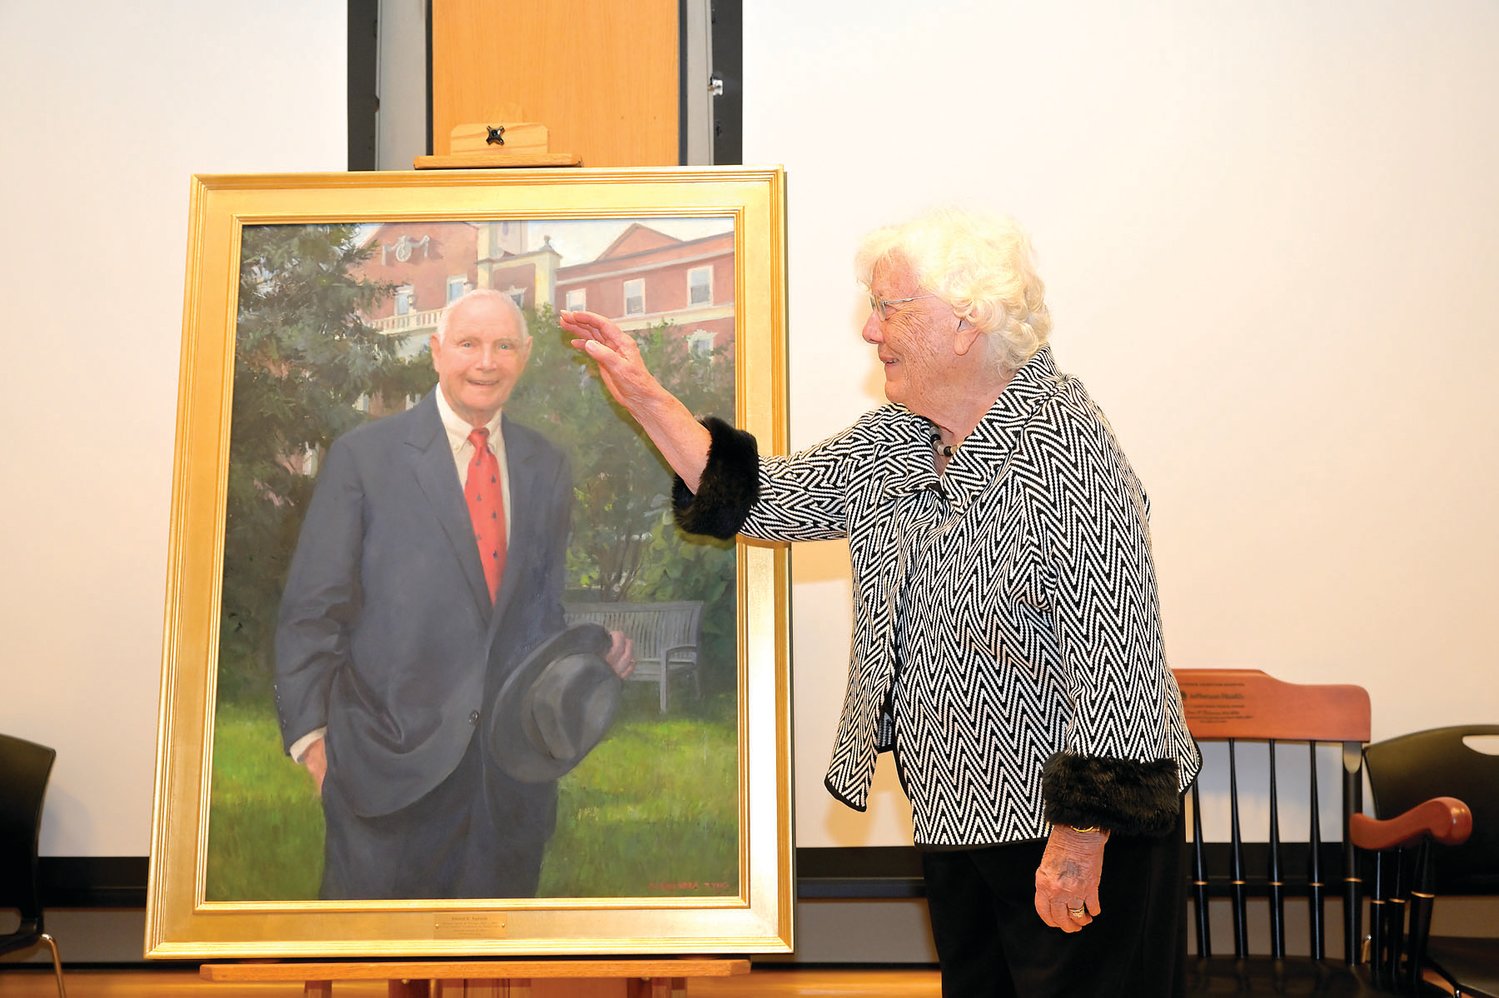 Gwen Asplundh reacts to the unveiling of a portrait of her late husband Edward at a recent Jefferson Abington Hospital ceremony.